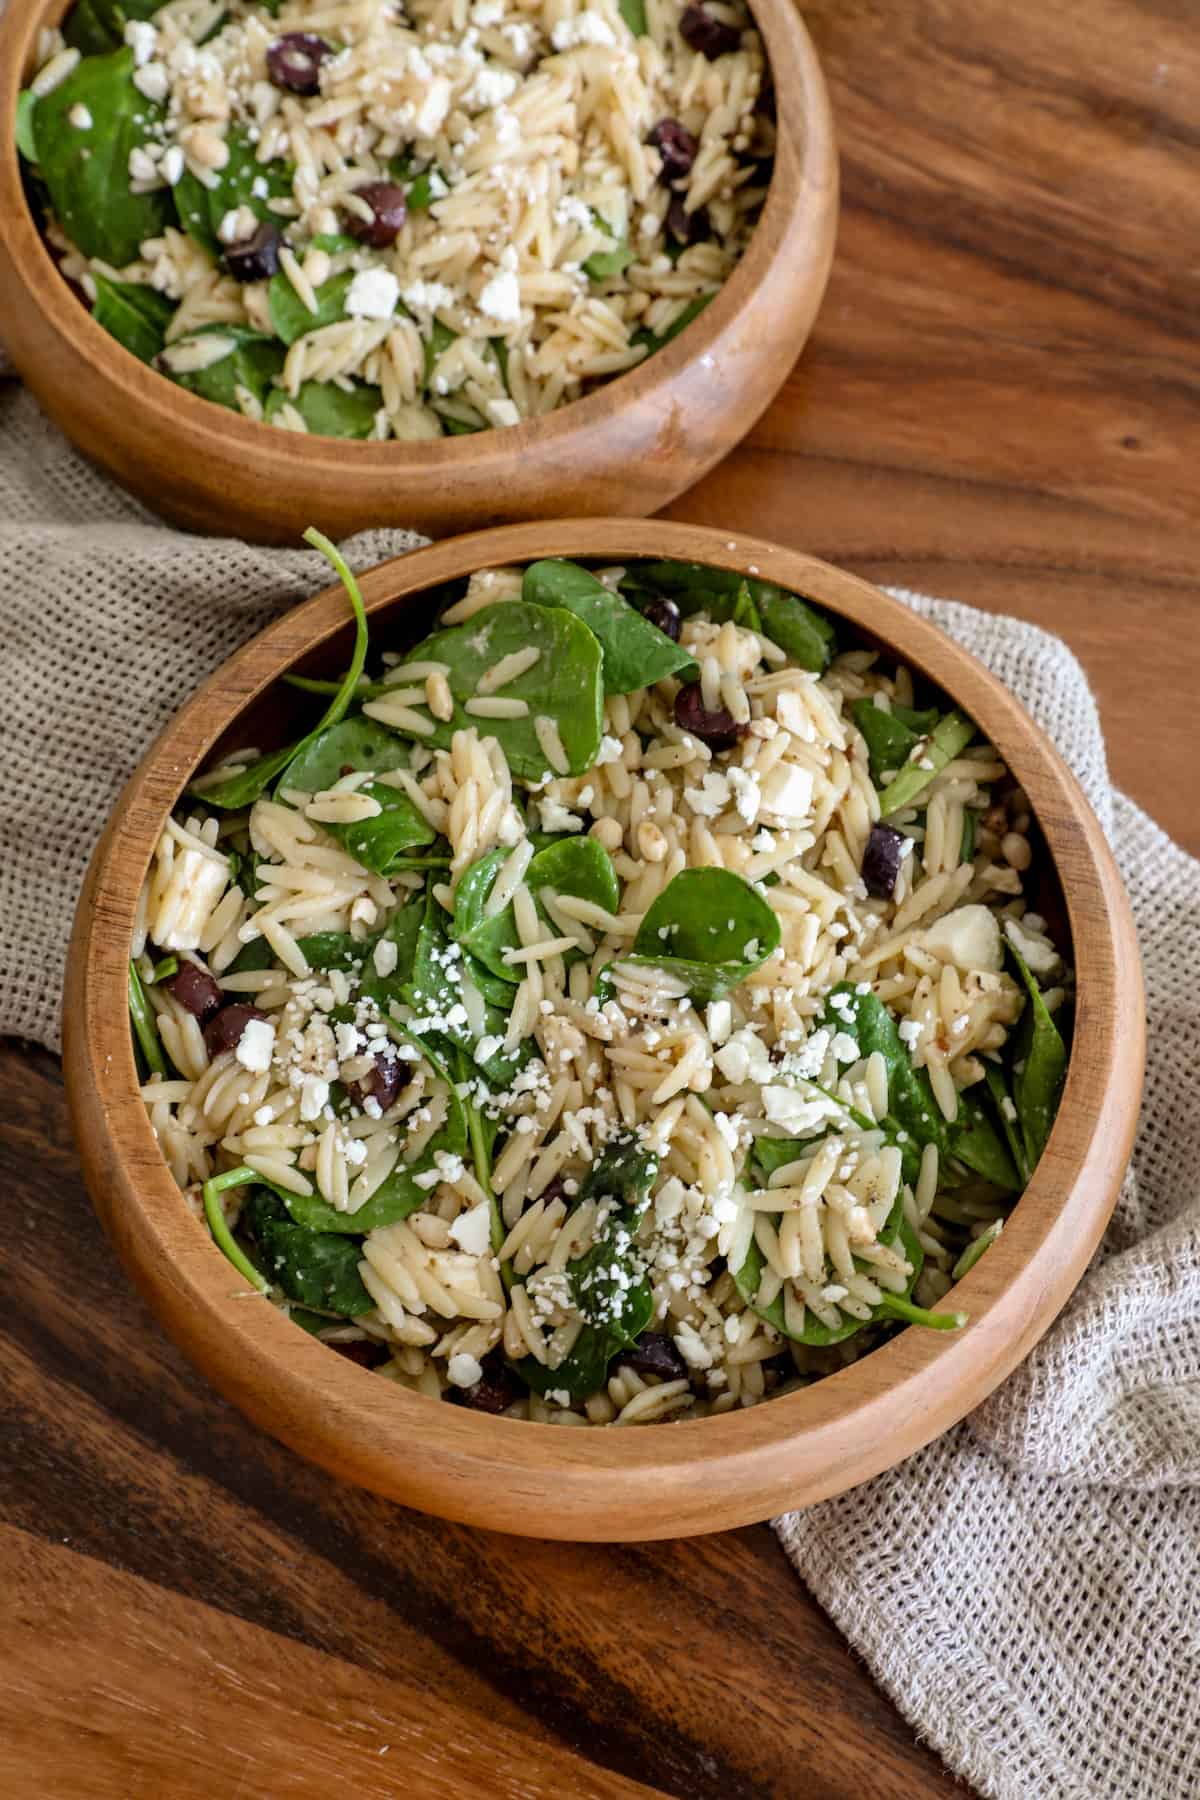 Two wooden bowls of feta and orzo salad.